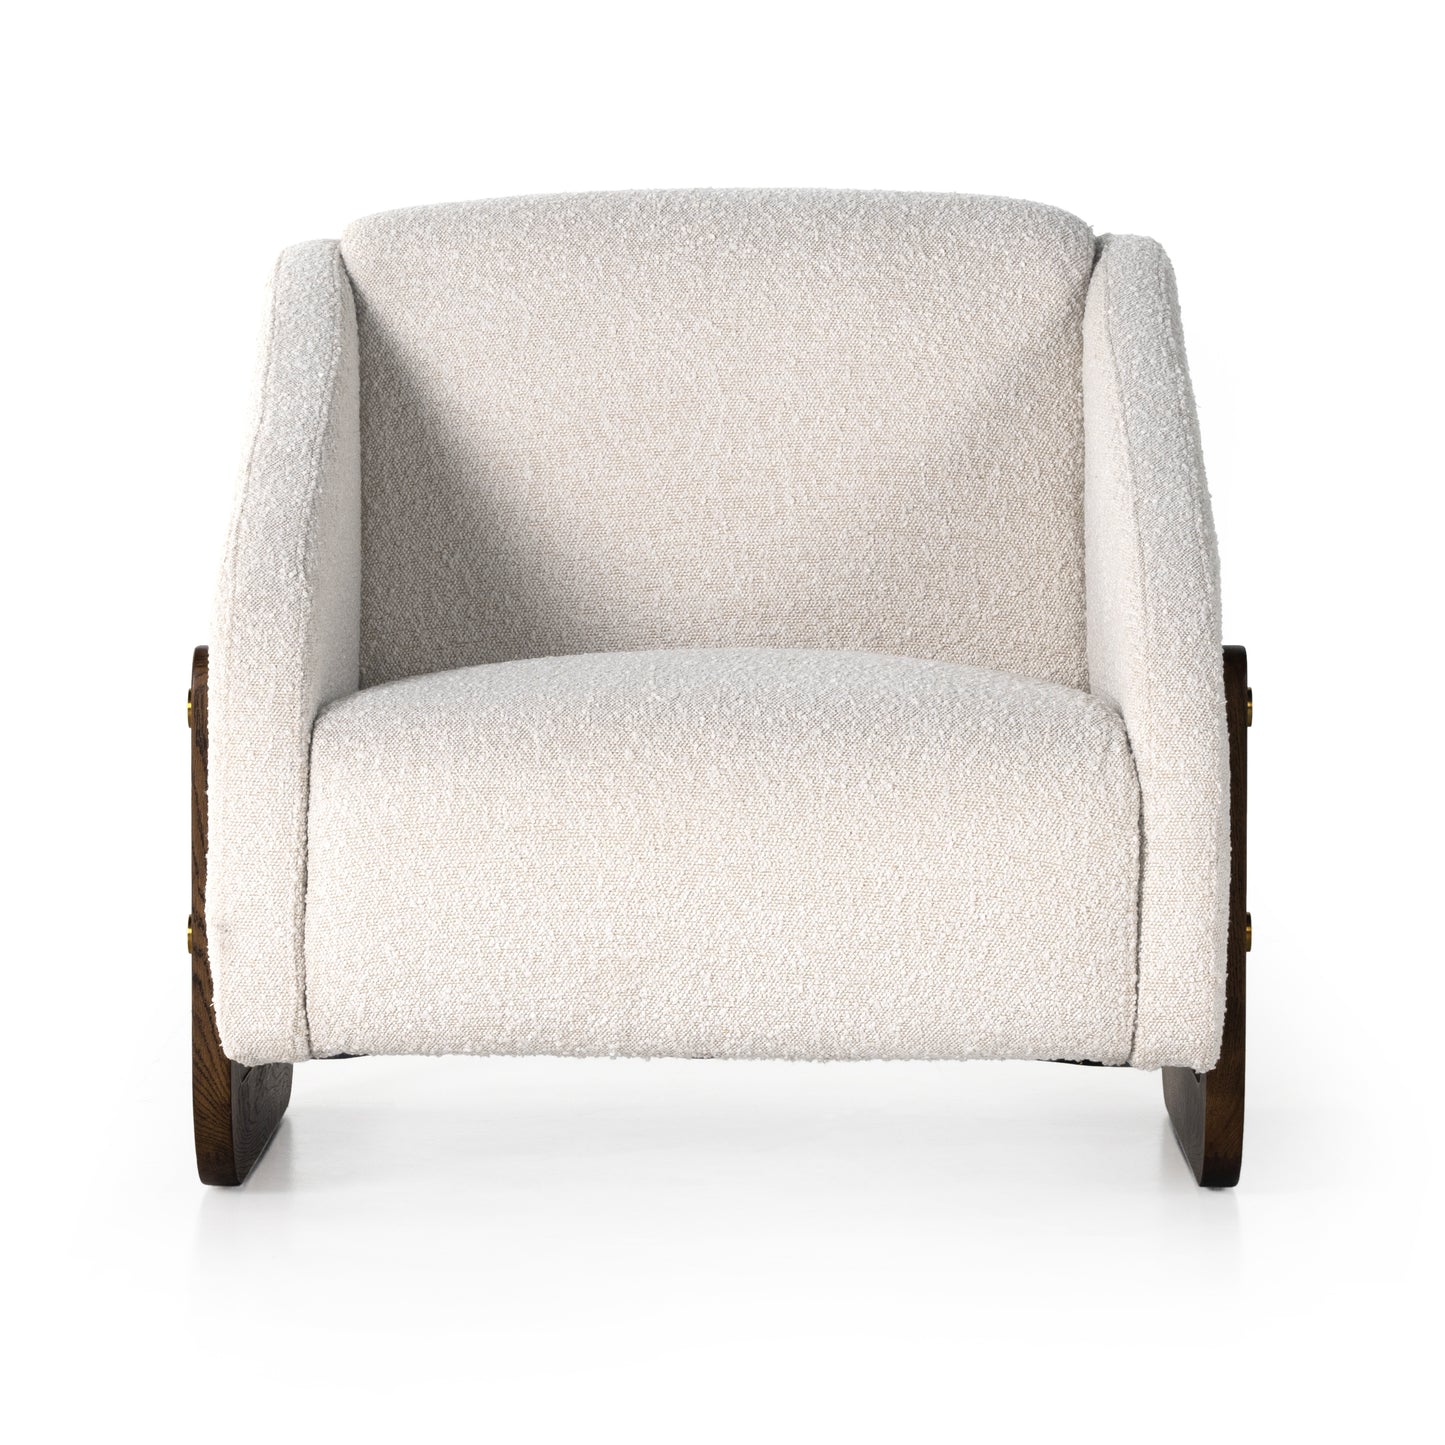 Load image into Gallery viewer, Bevon Chair-Knoll Natural Lounge Chair Four Hands     Four Hands, Mid Century Modern Furniture, Old Bones Furniture Company, Old Bones Co, Modern Mid Century, Designer Furniture, https://www.oldbonesco.com/
